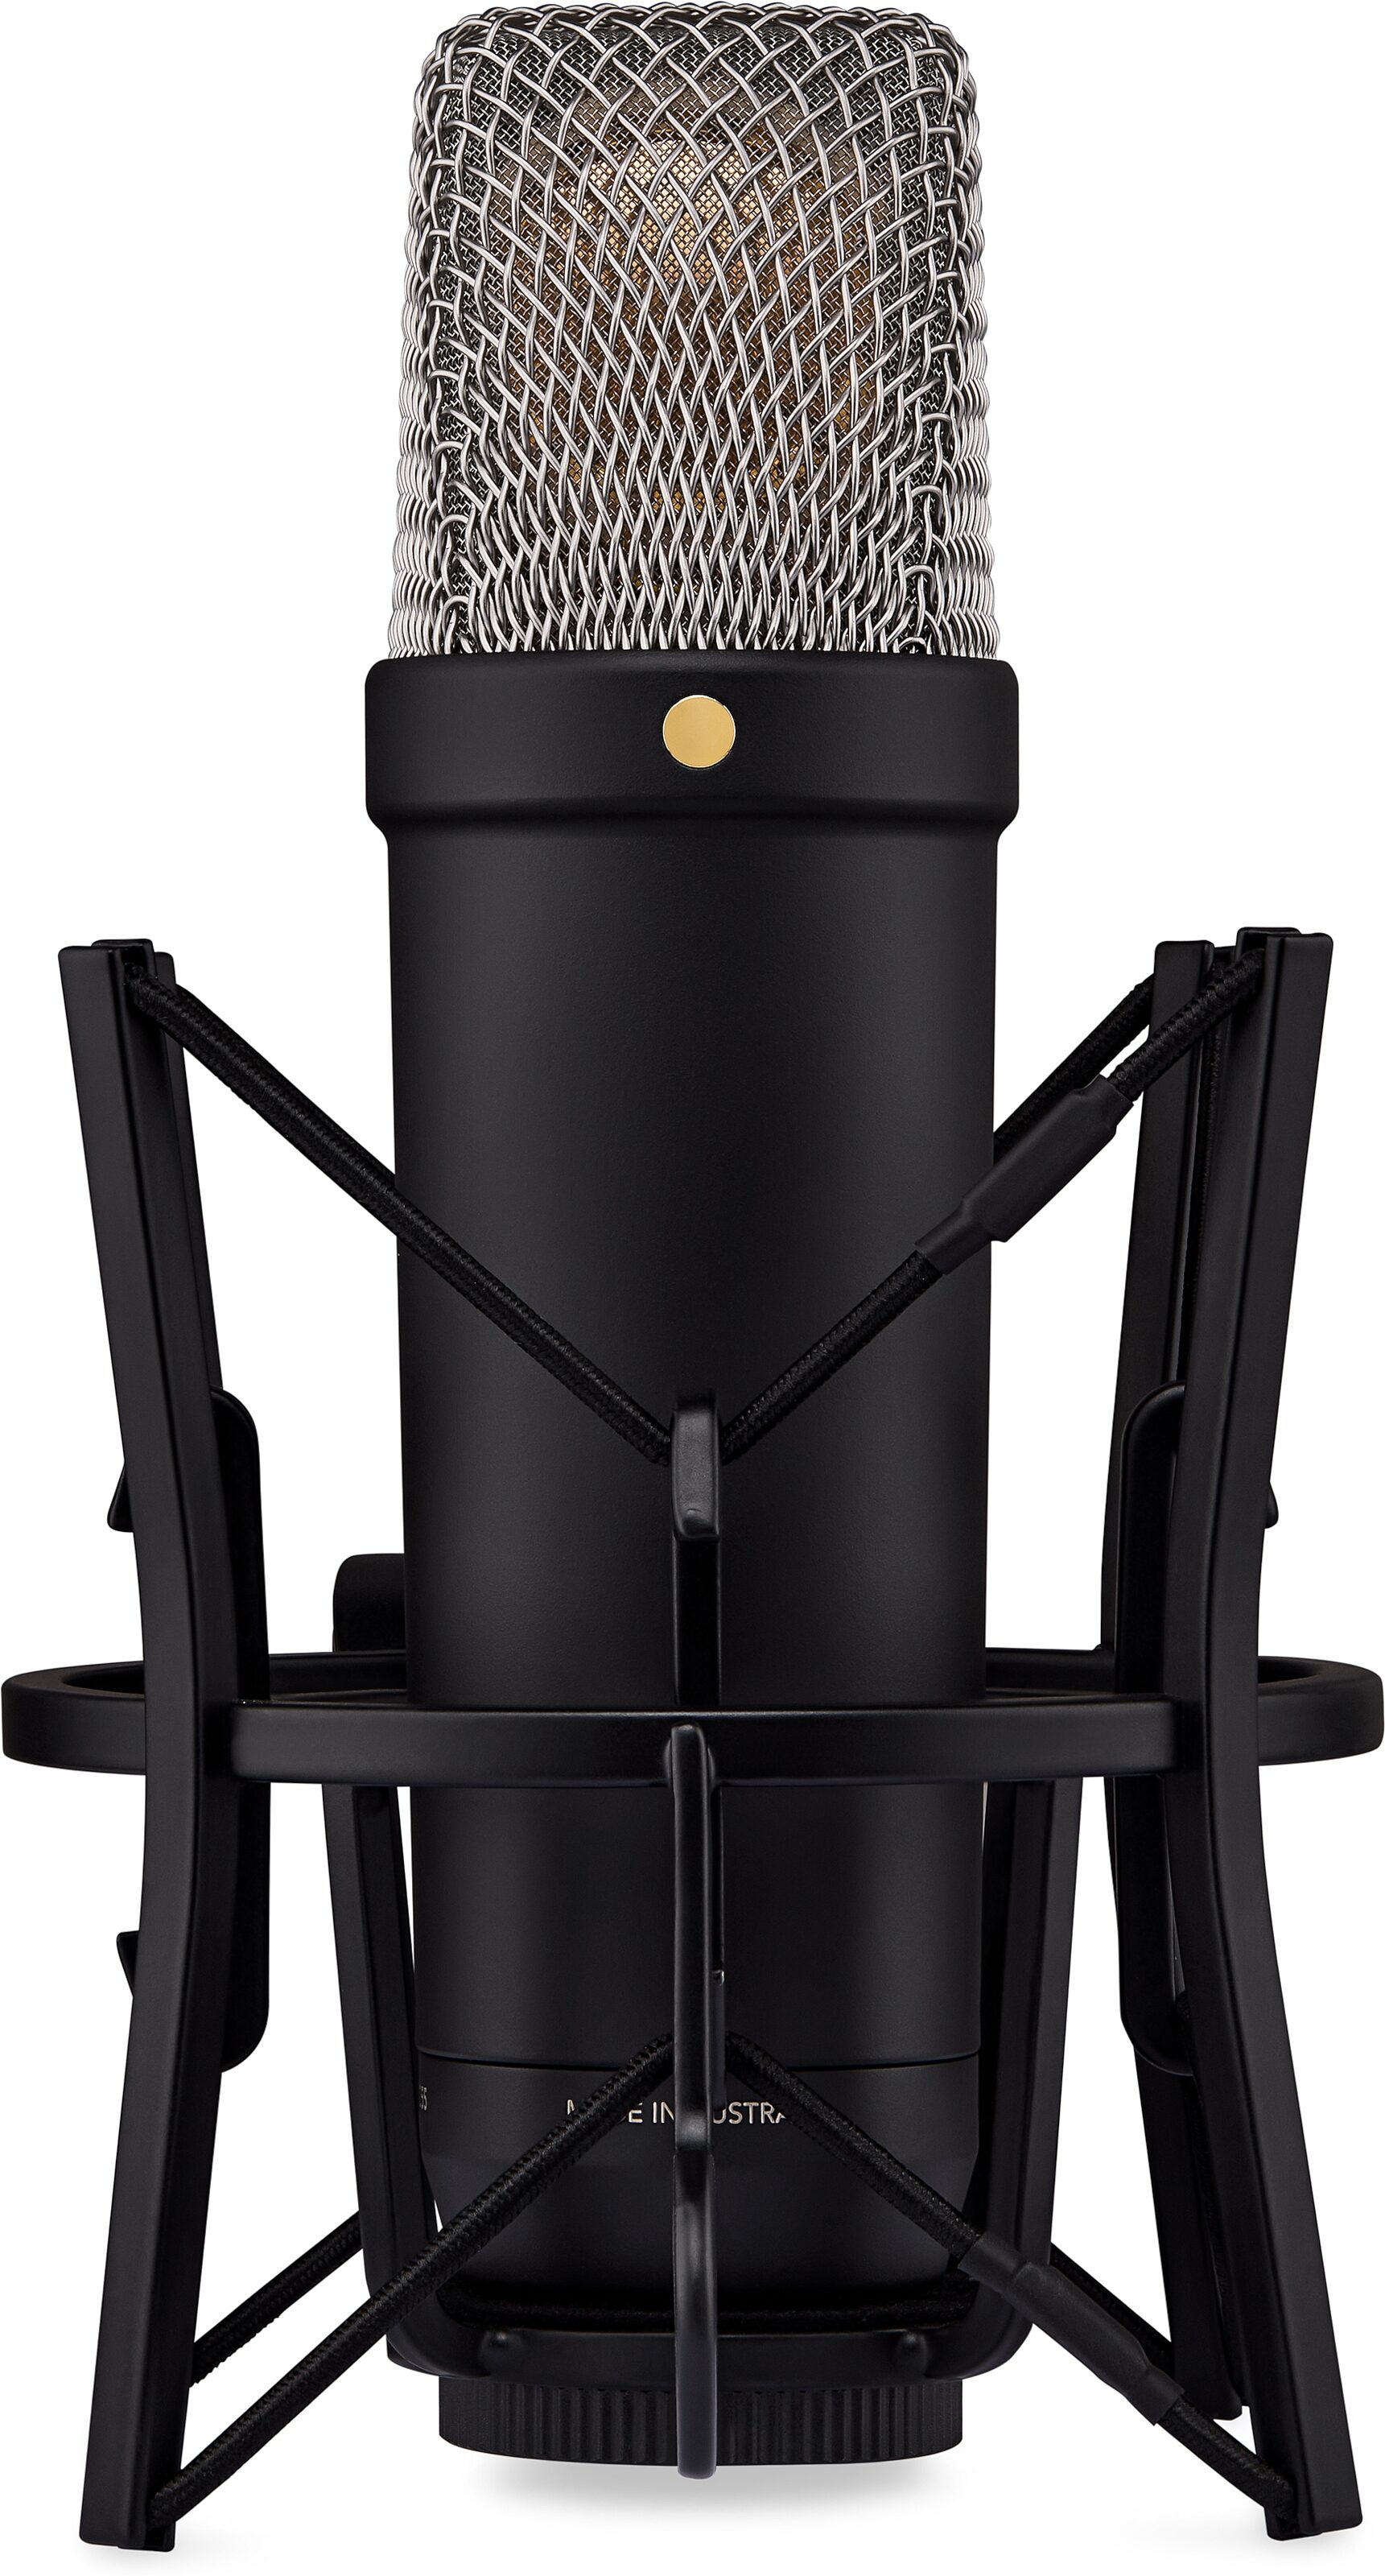 Røde NT1 5th Generation Studio Condenser Microphone Innovates With